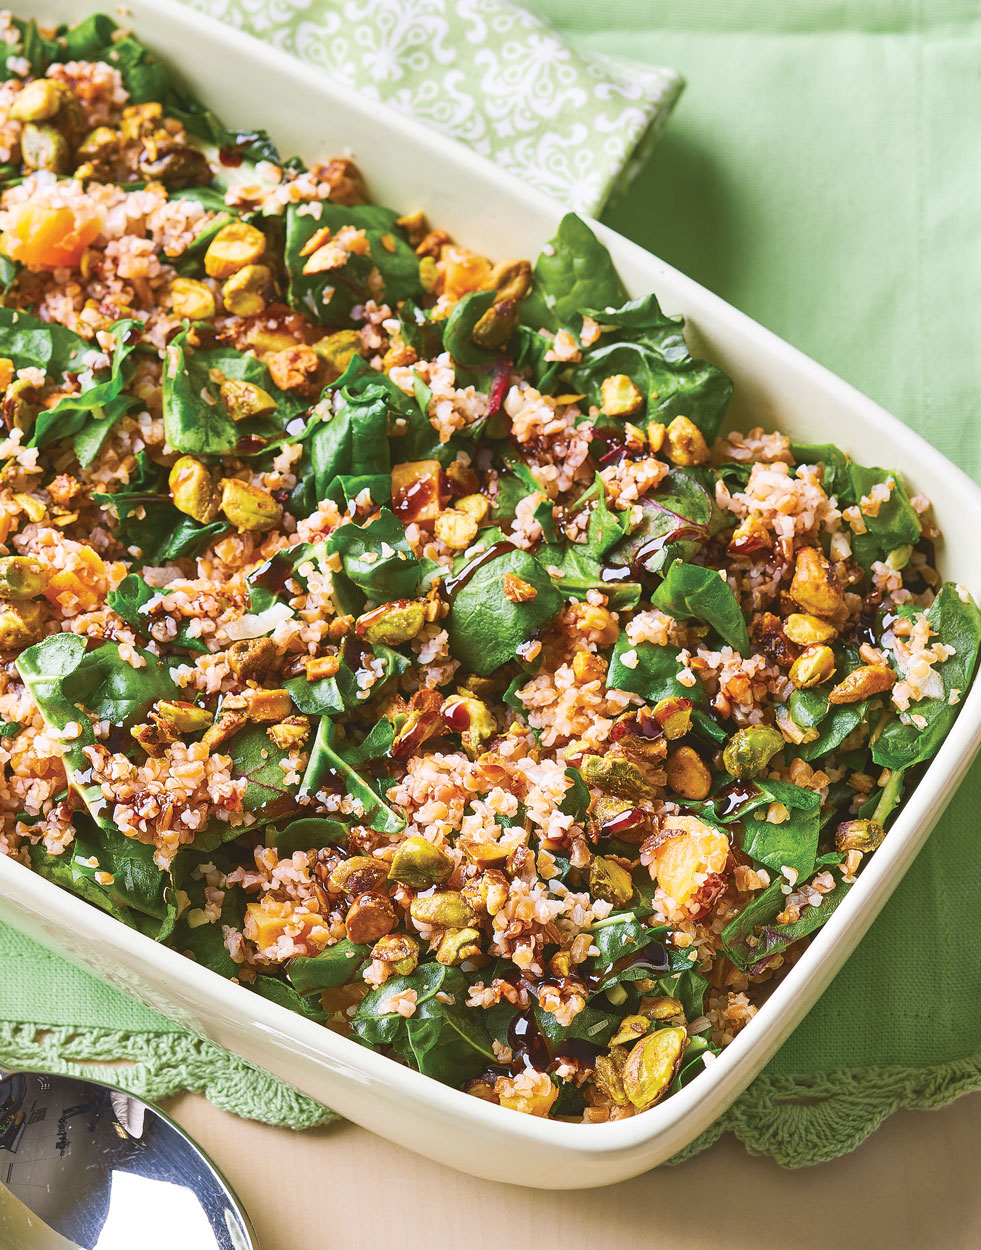 Bulgur "Pilaf" with Swiss Chard and Dried Apricots